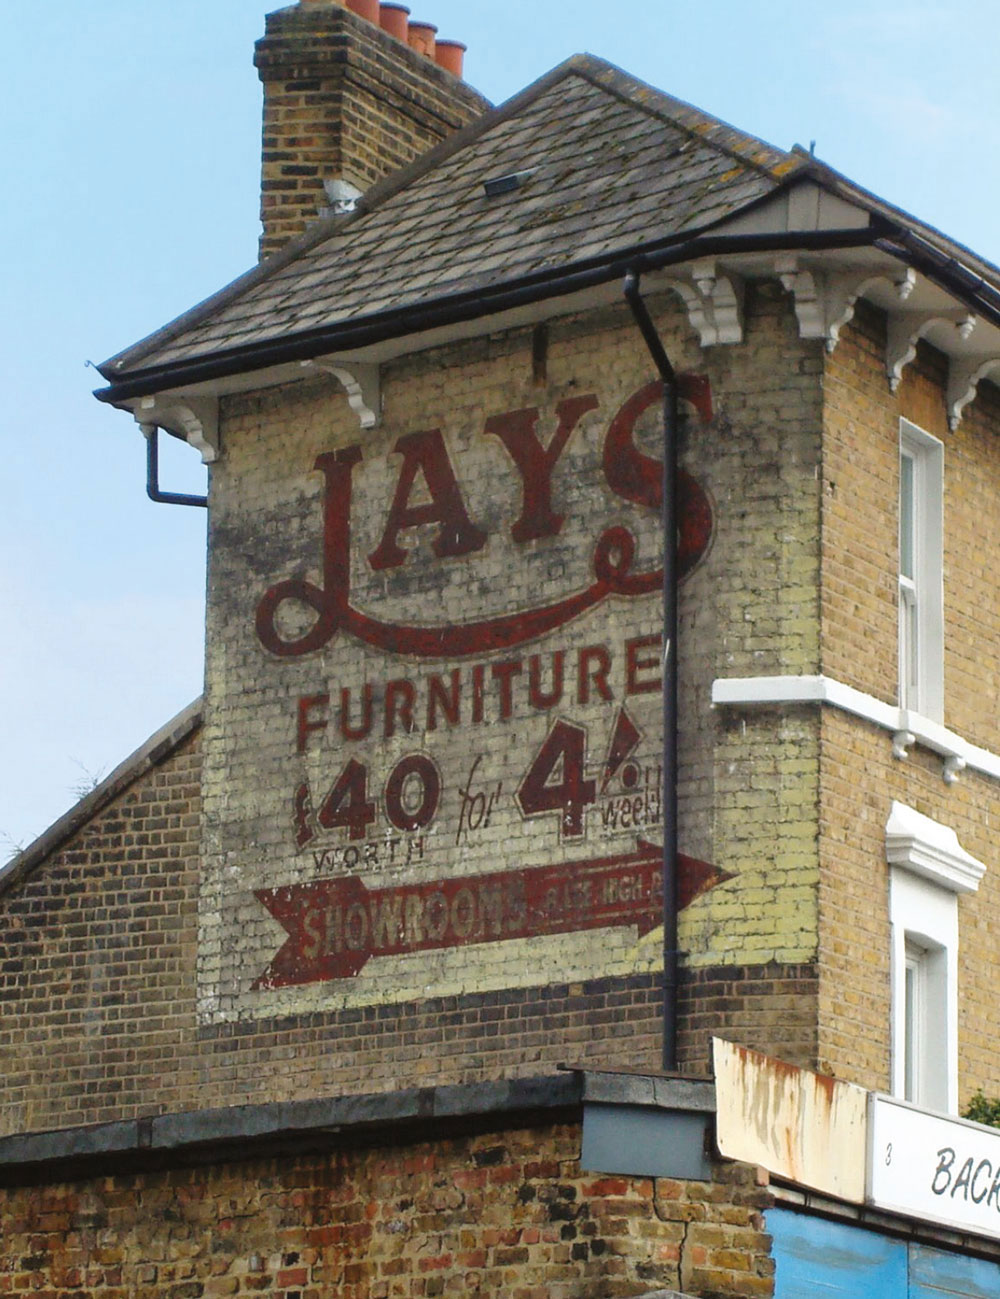 Jay's Furniture Building